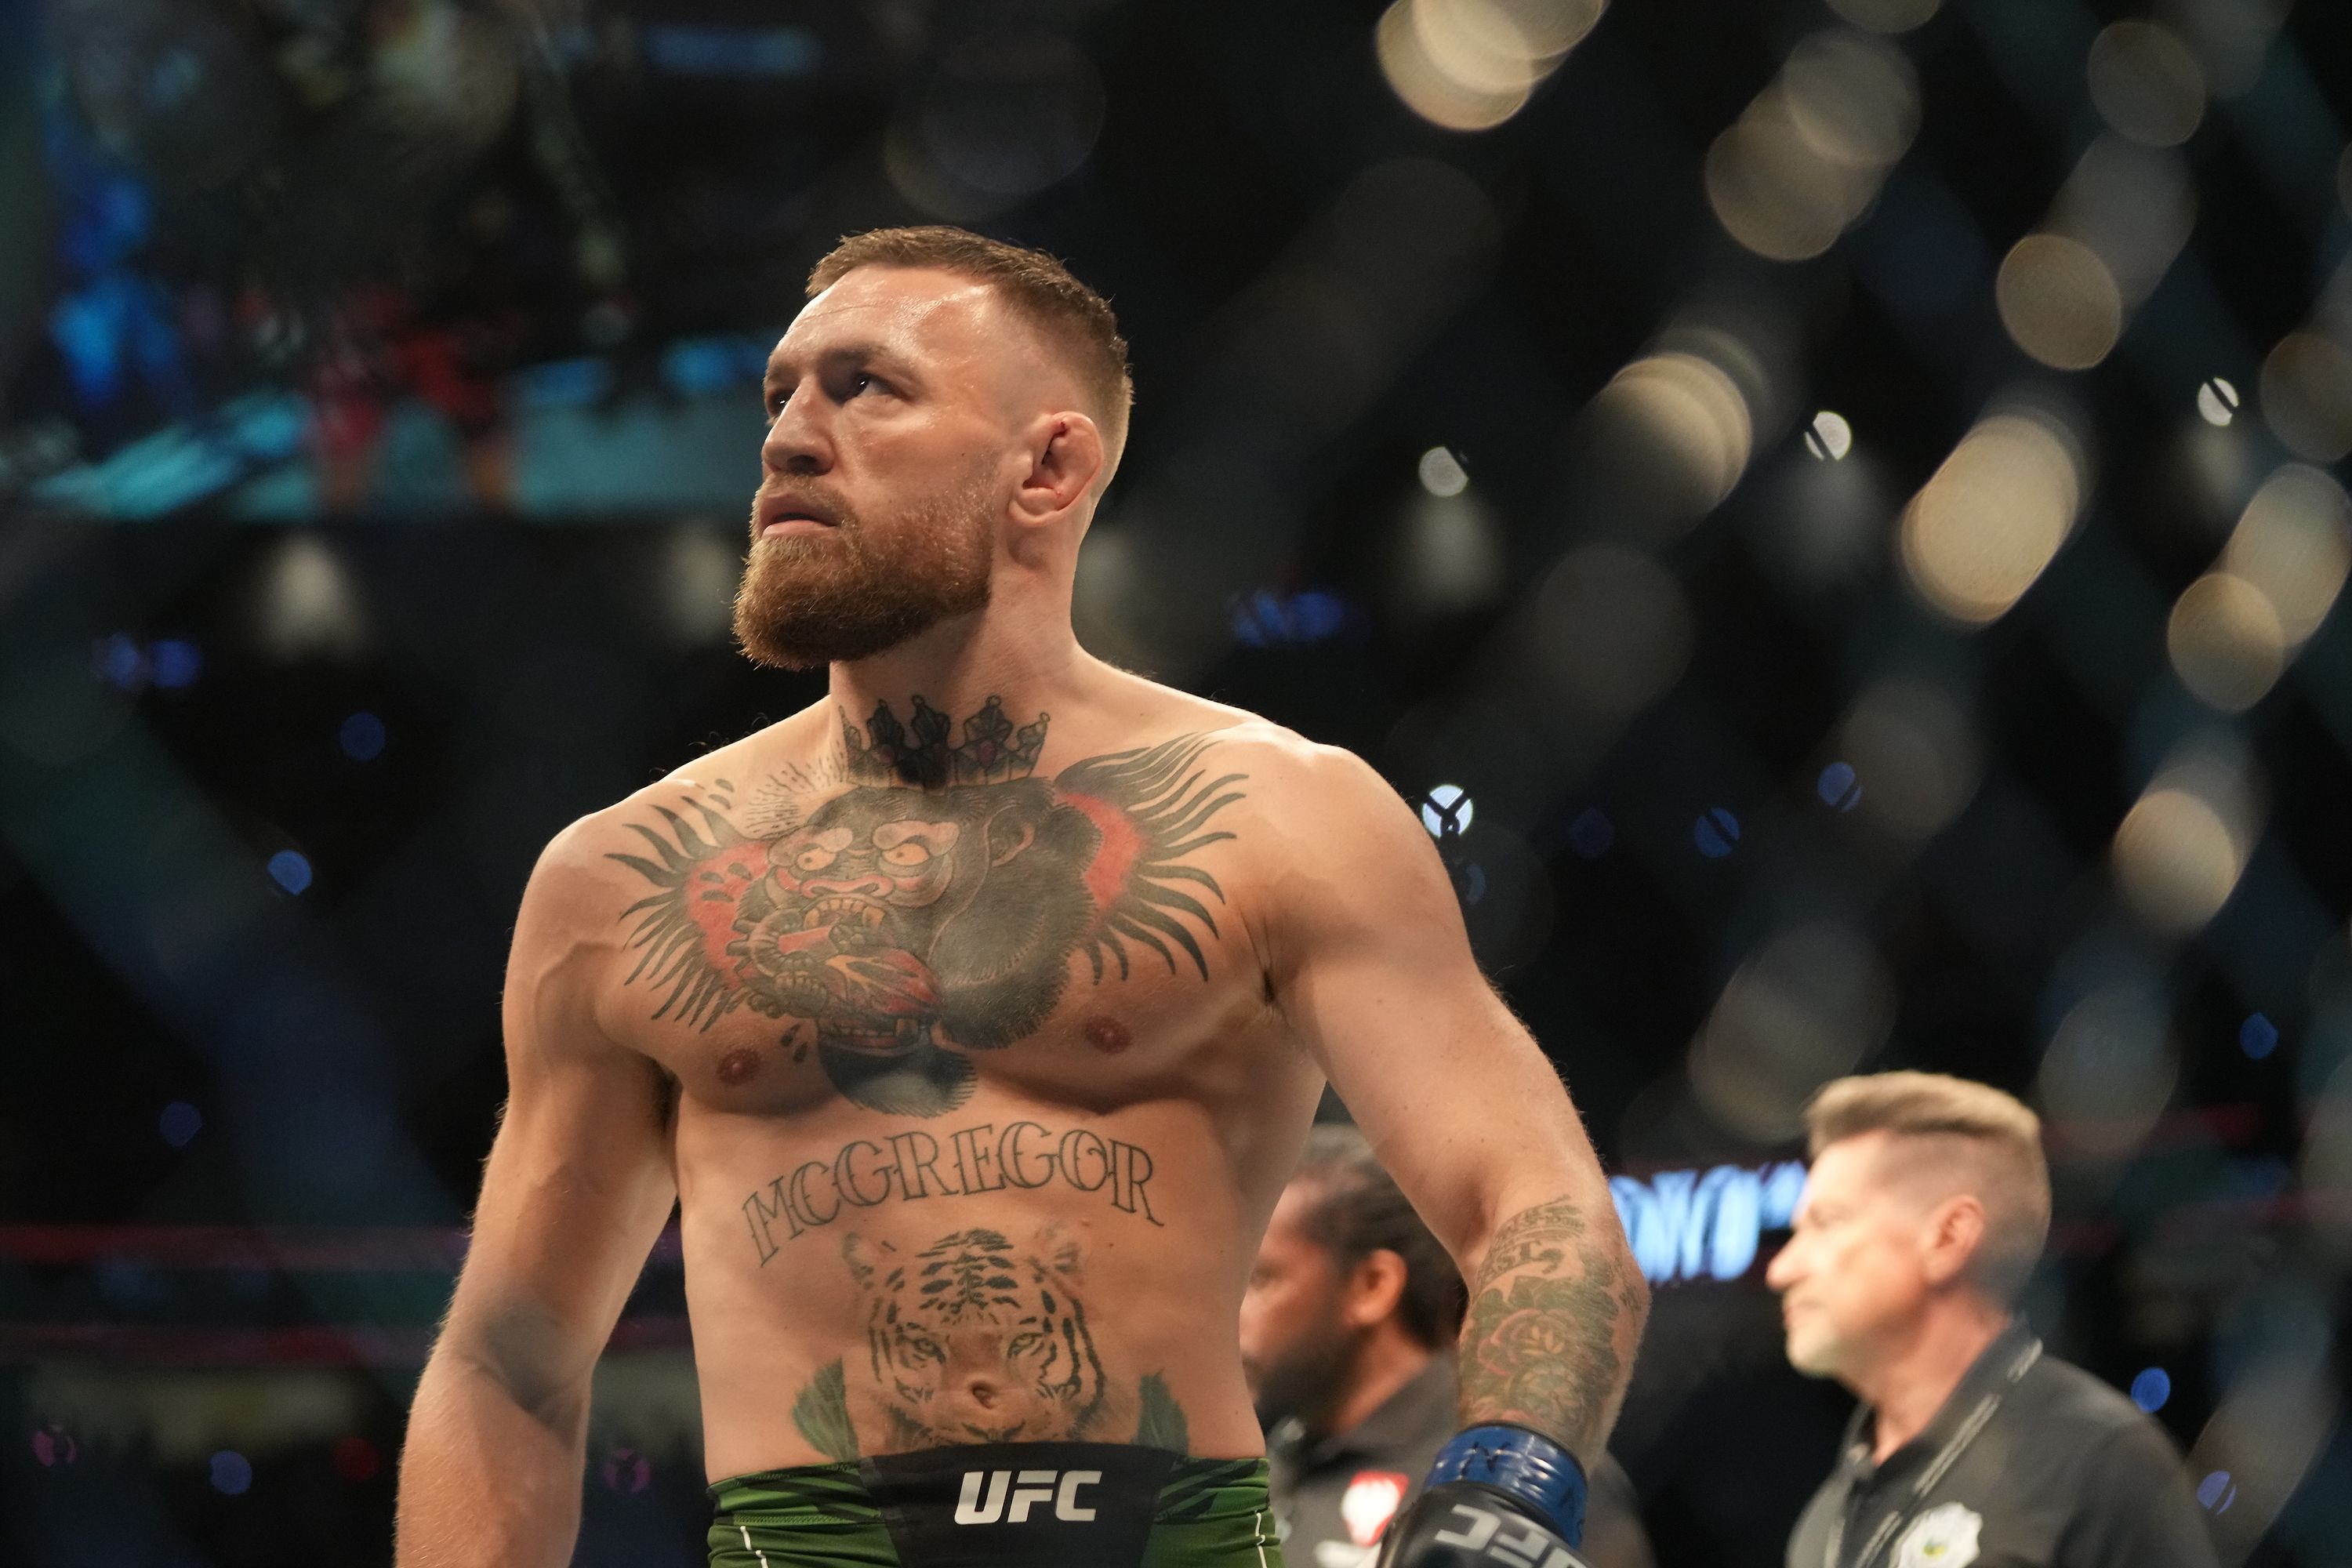 Conor McGregor preparing to fight Dustin Poirier in their lightweight bout during UFC 264 at T-Mobile Arena on July 10, 2021, in Las Vegas, Nevada | Photo: Louis Grasse/PxImages/Icon Sportswire via Getty Images